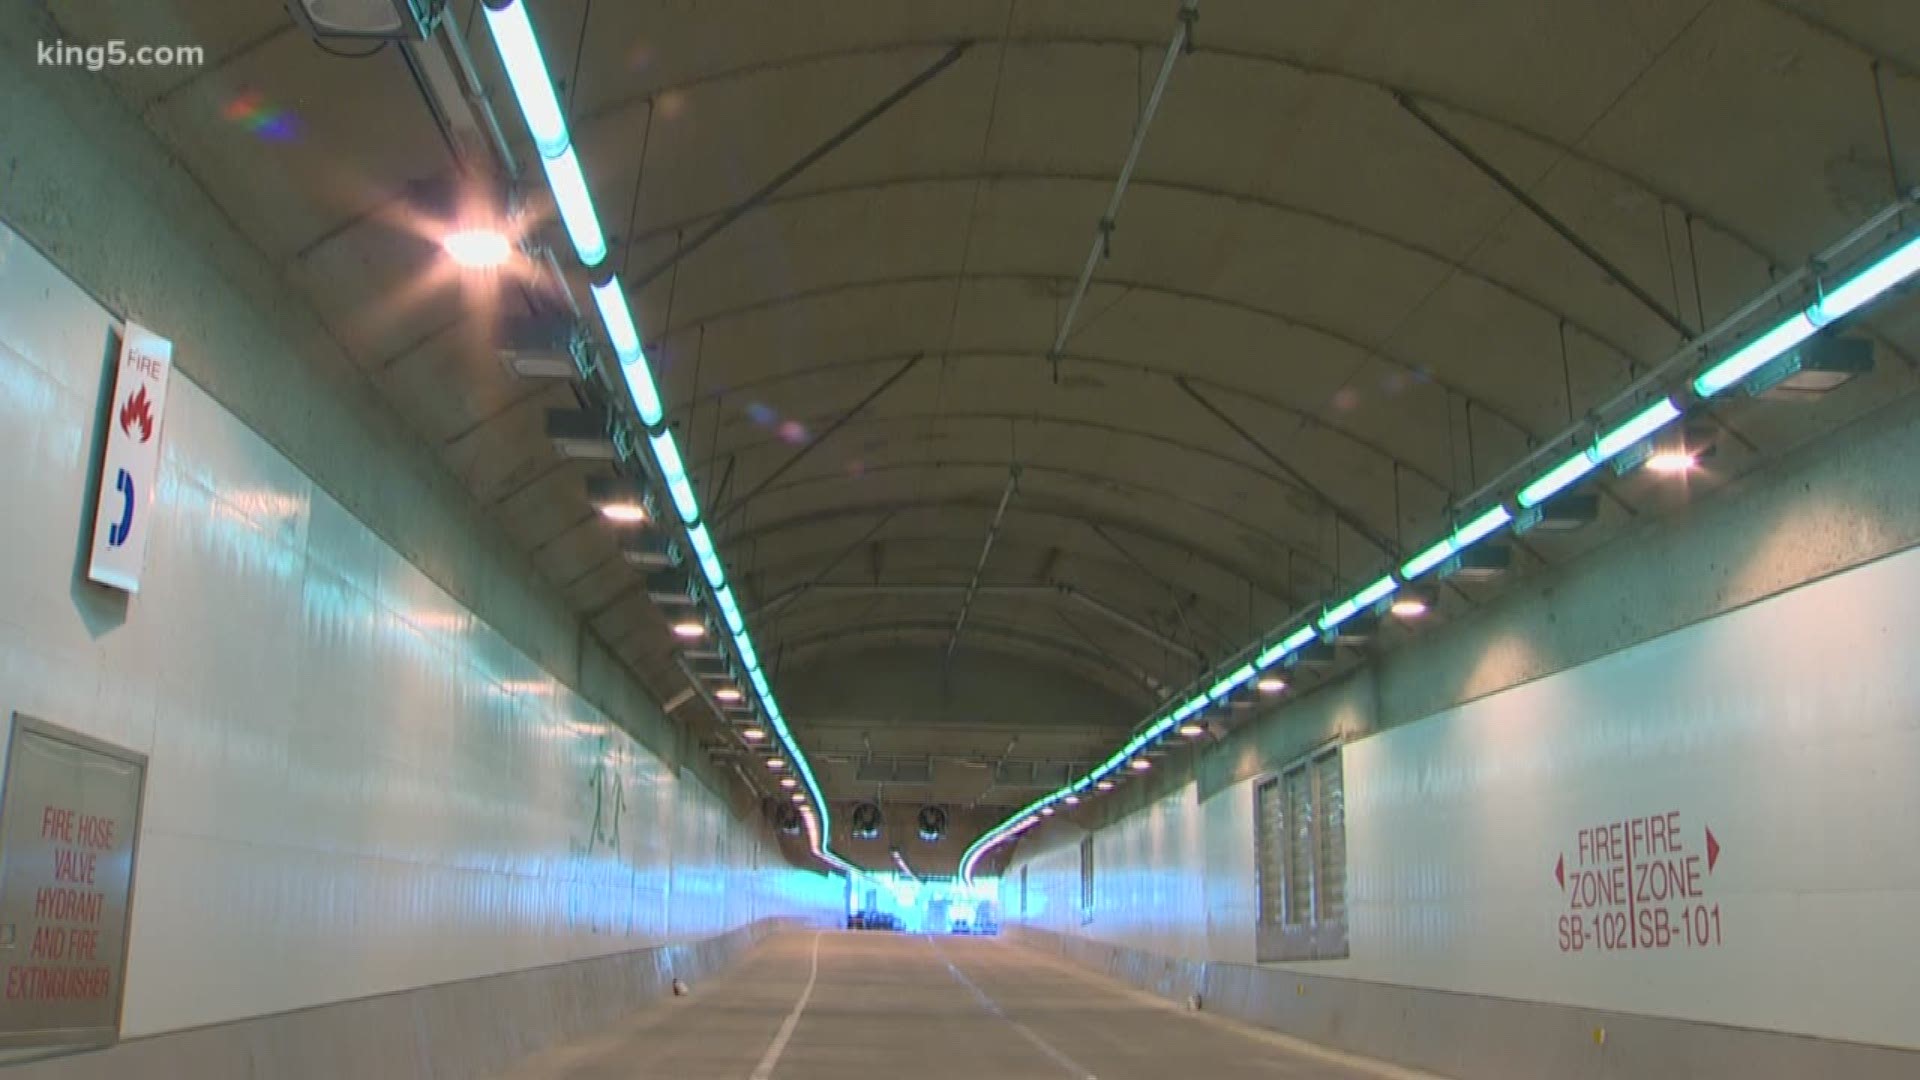 By Monday, you will be able to drive through the new highway 99 tunnel under the Seattle waterfront. But there are places you won't be able to see through your windshield, and that's where we are taking you.